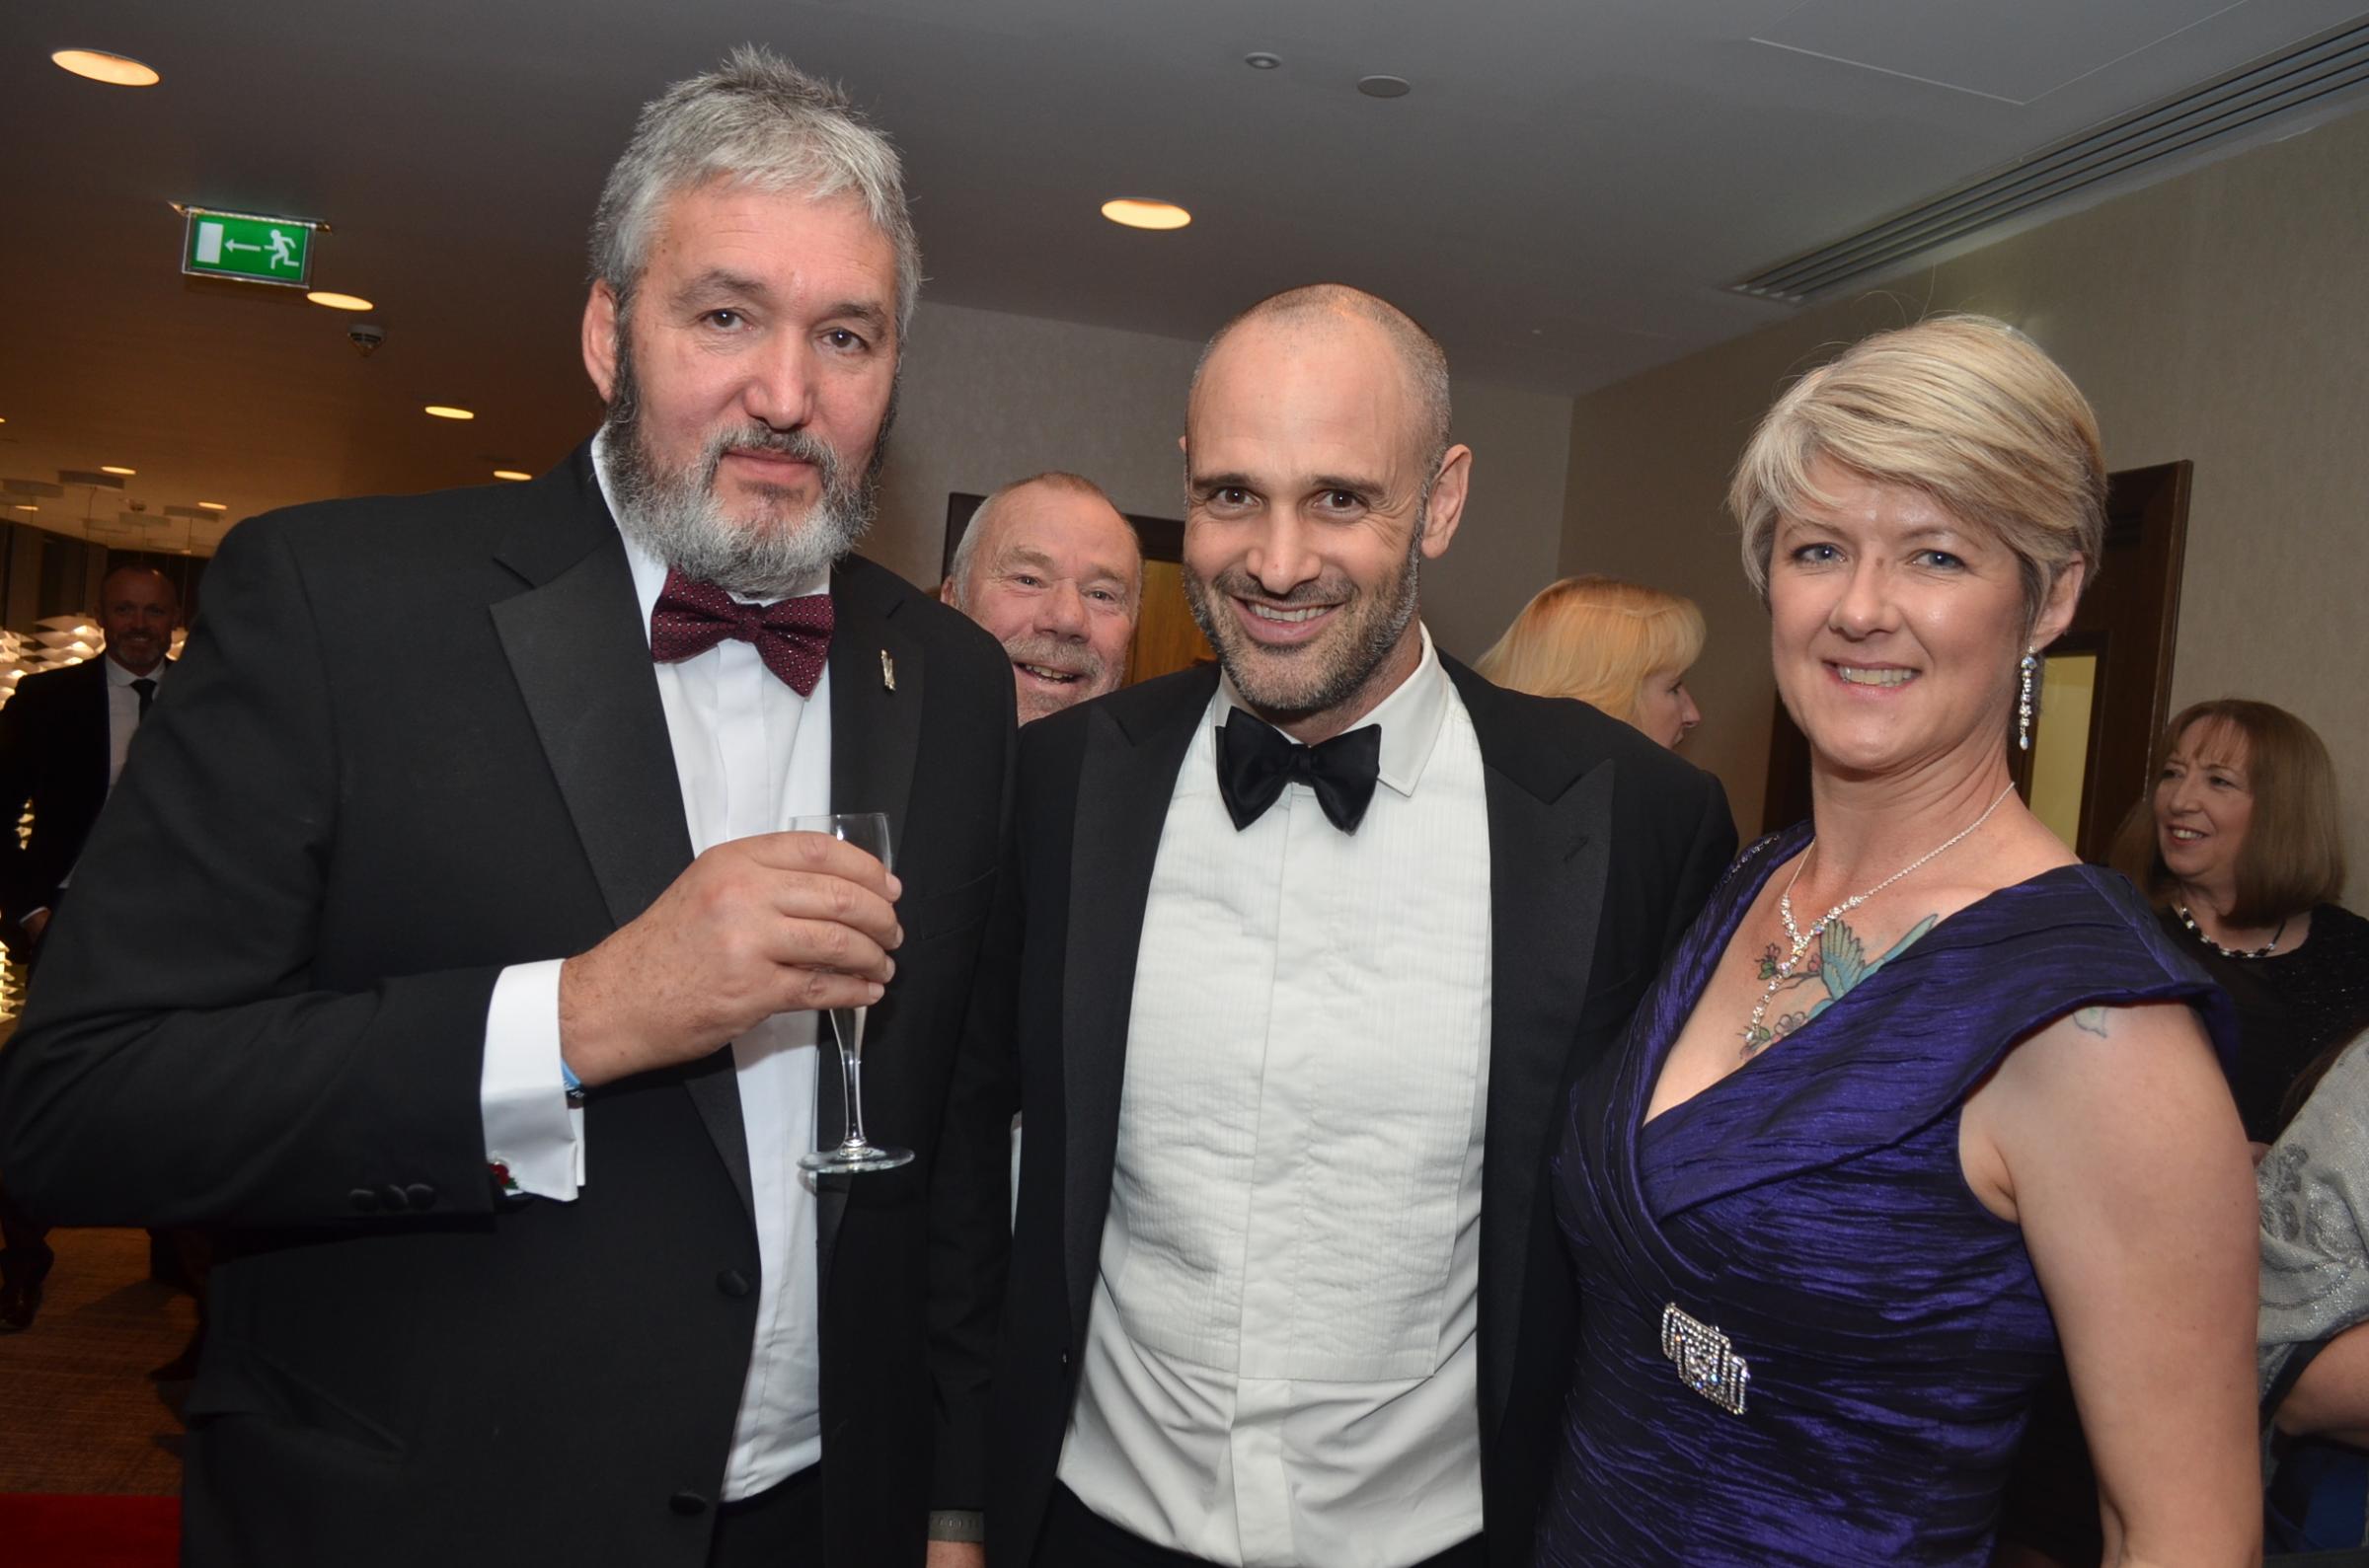 Explorer is guest of honour at charity fundraiser